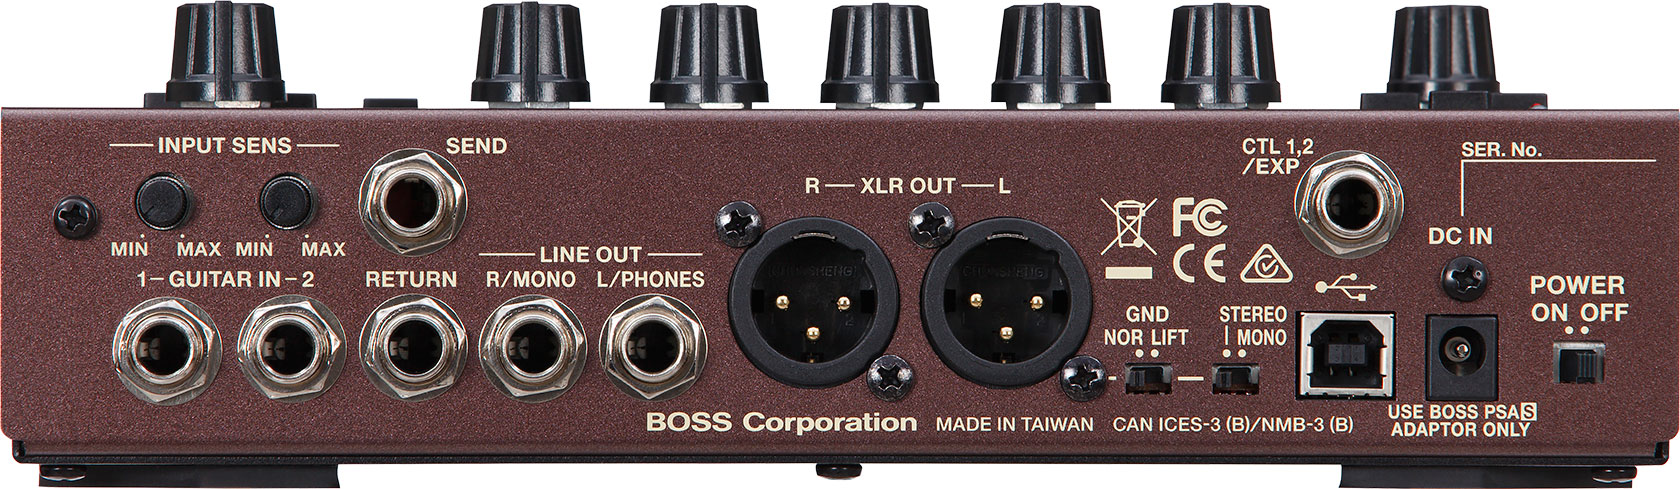 Boss Ad-10 - Acoustic preamp - Variation 2